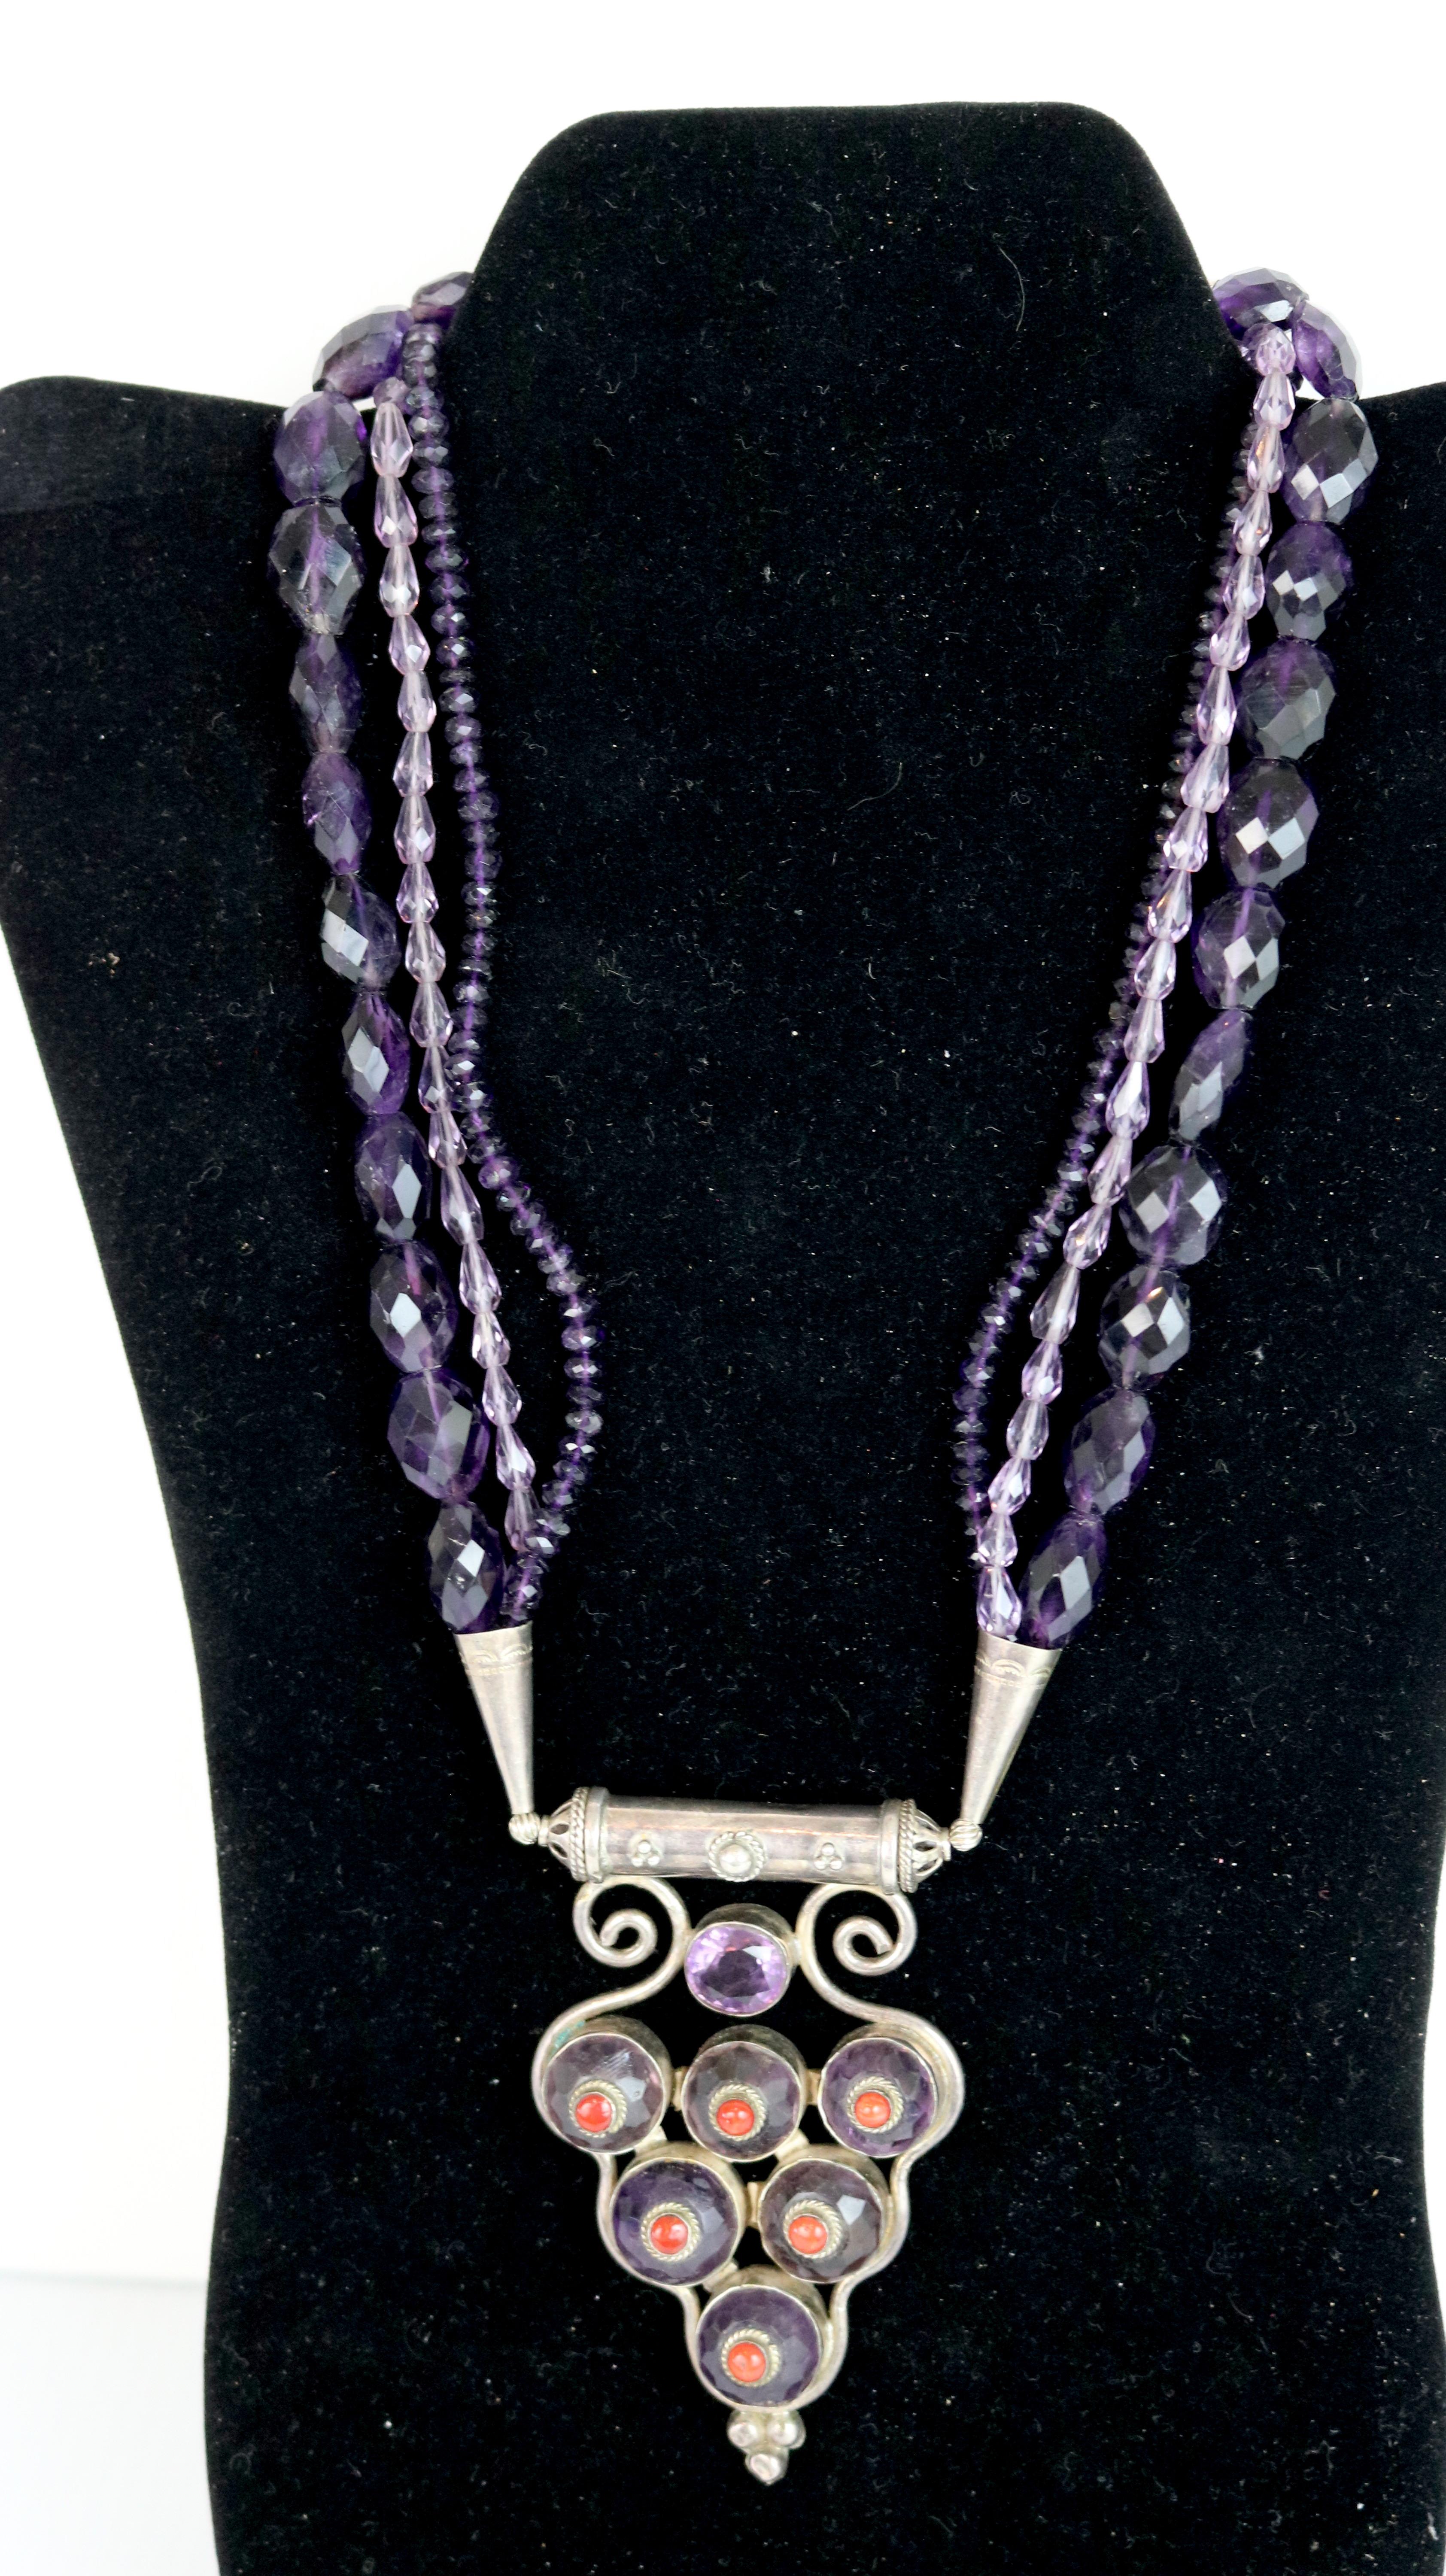  Couture Artisan One of a Kind Necklace- 
3 Strand Multi- Cut Amethyst Strands- with a Gorgeous Hanging Curvilinear Pendant  of an Amethyst Cabachon Setting with Center Coral Stones in Sterling Silver Setting
and clasp.
A Gorgeous Statement Necklace